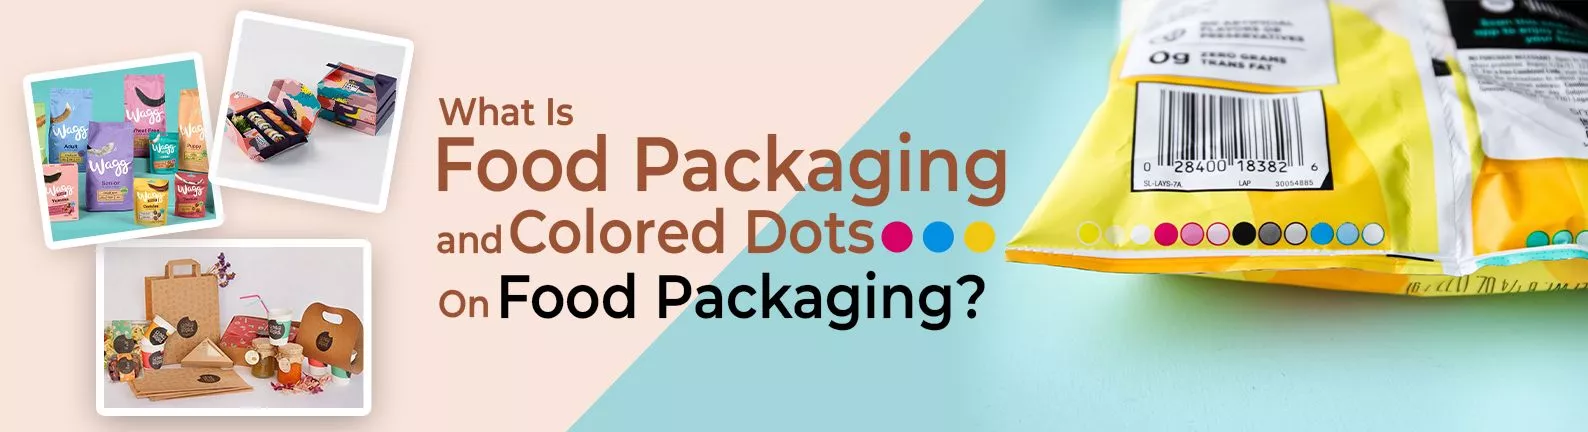 What Is Food Packaging and Colored Dots On Food Boxes?